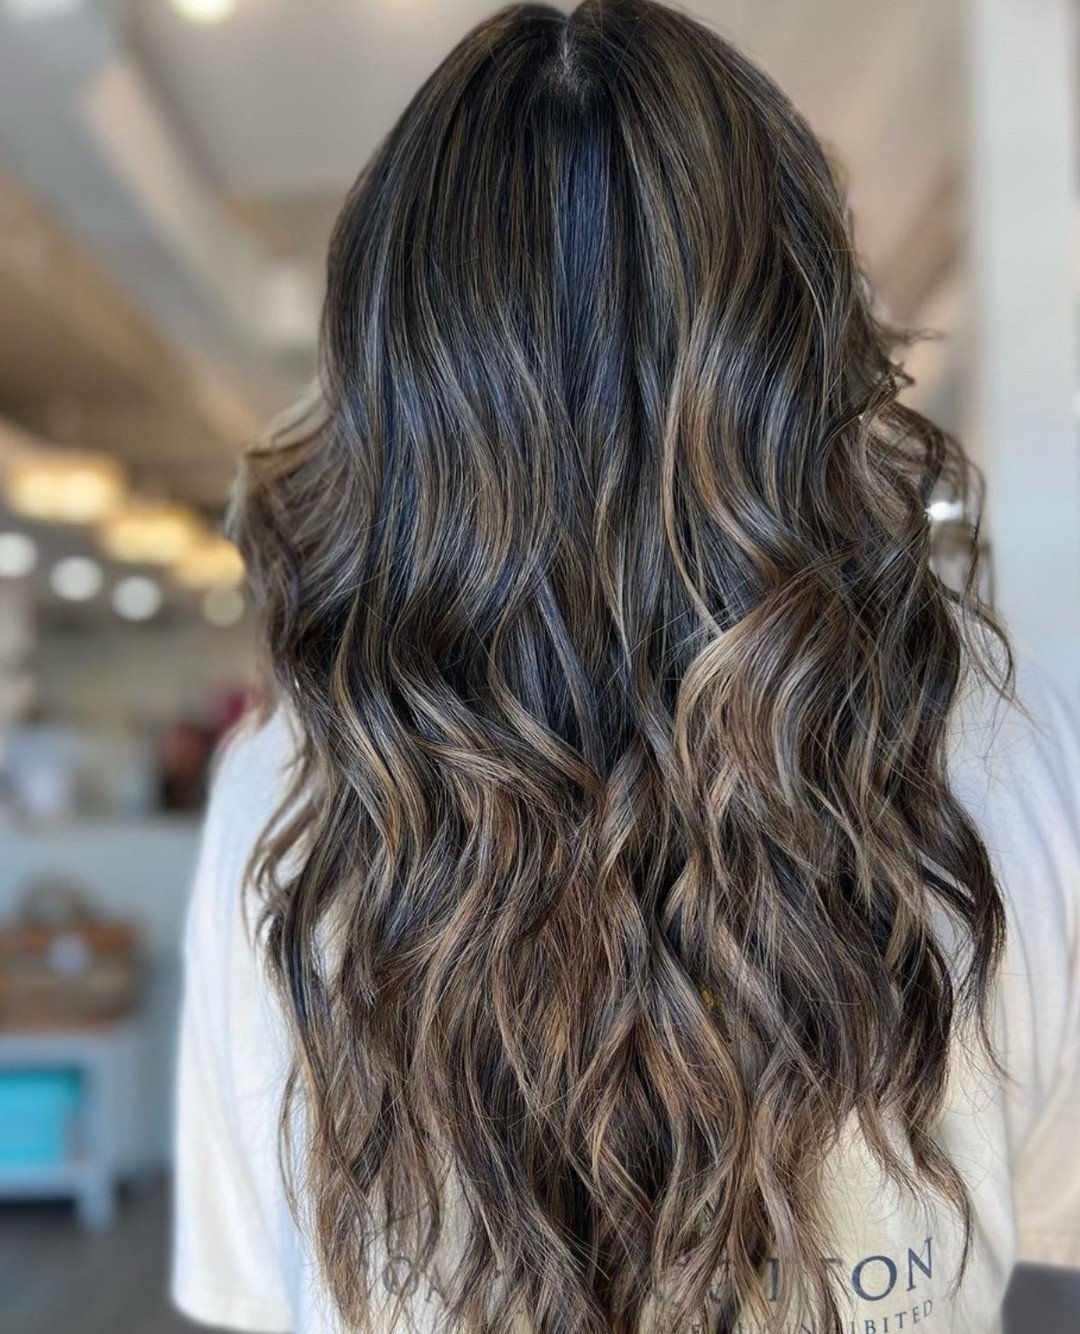 Gorgeous transformation by @styled.by.shea! ✨️⁠
Swipe to see the before! 🤭